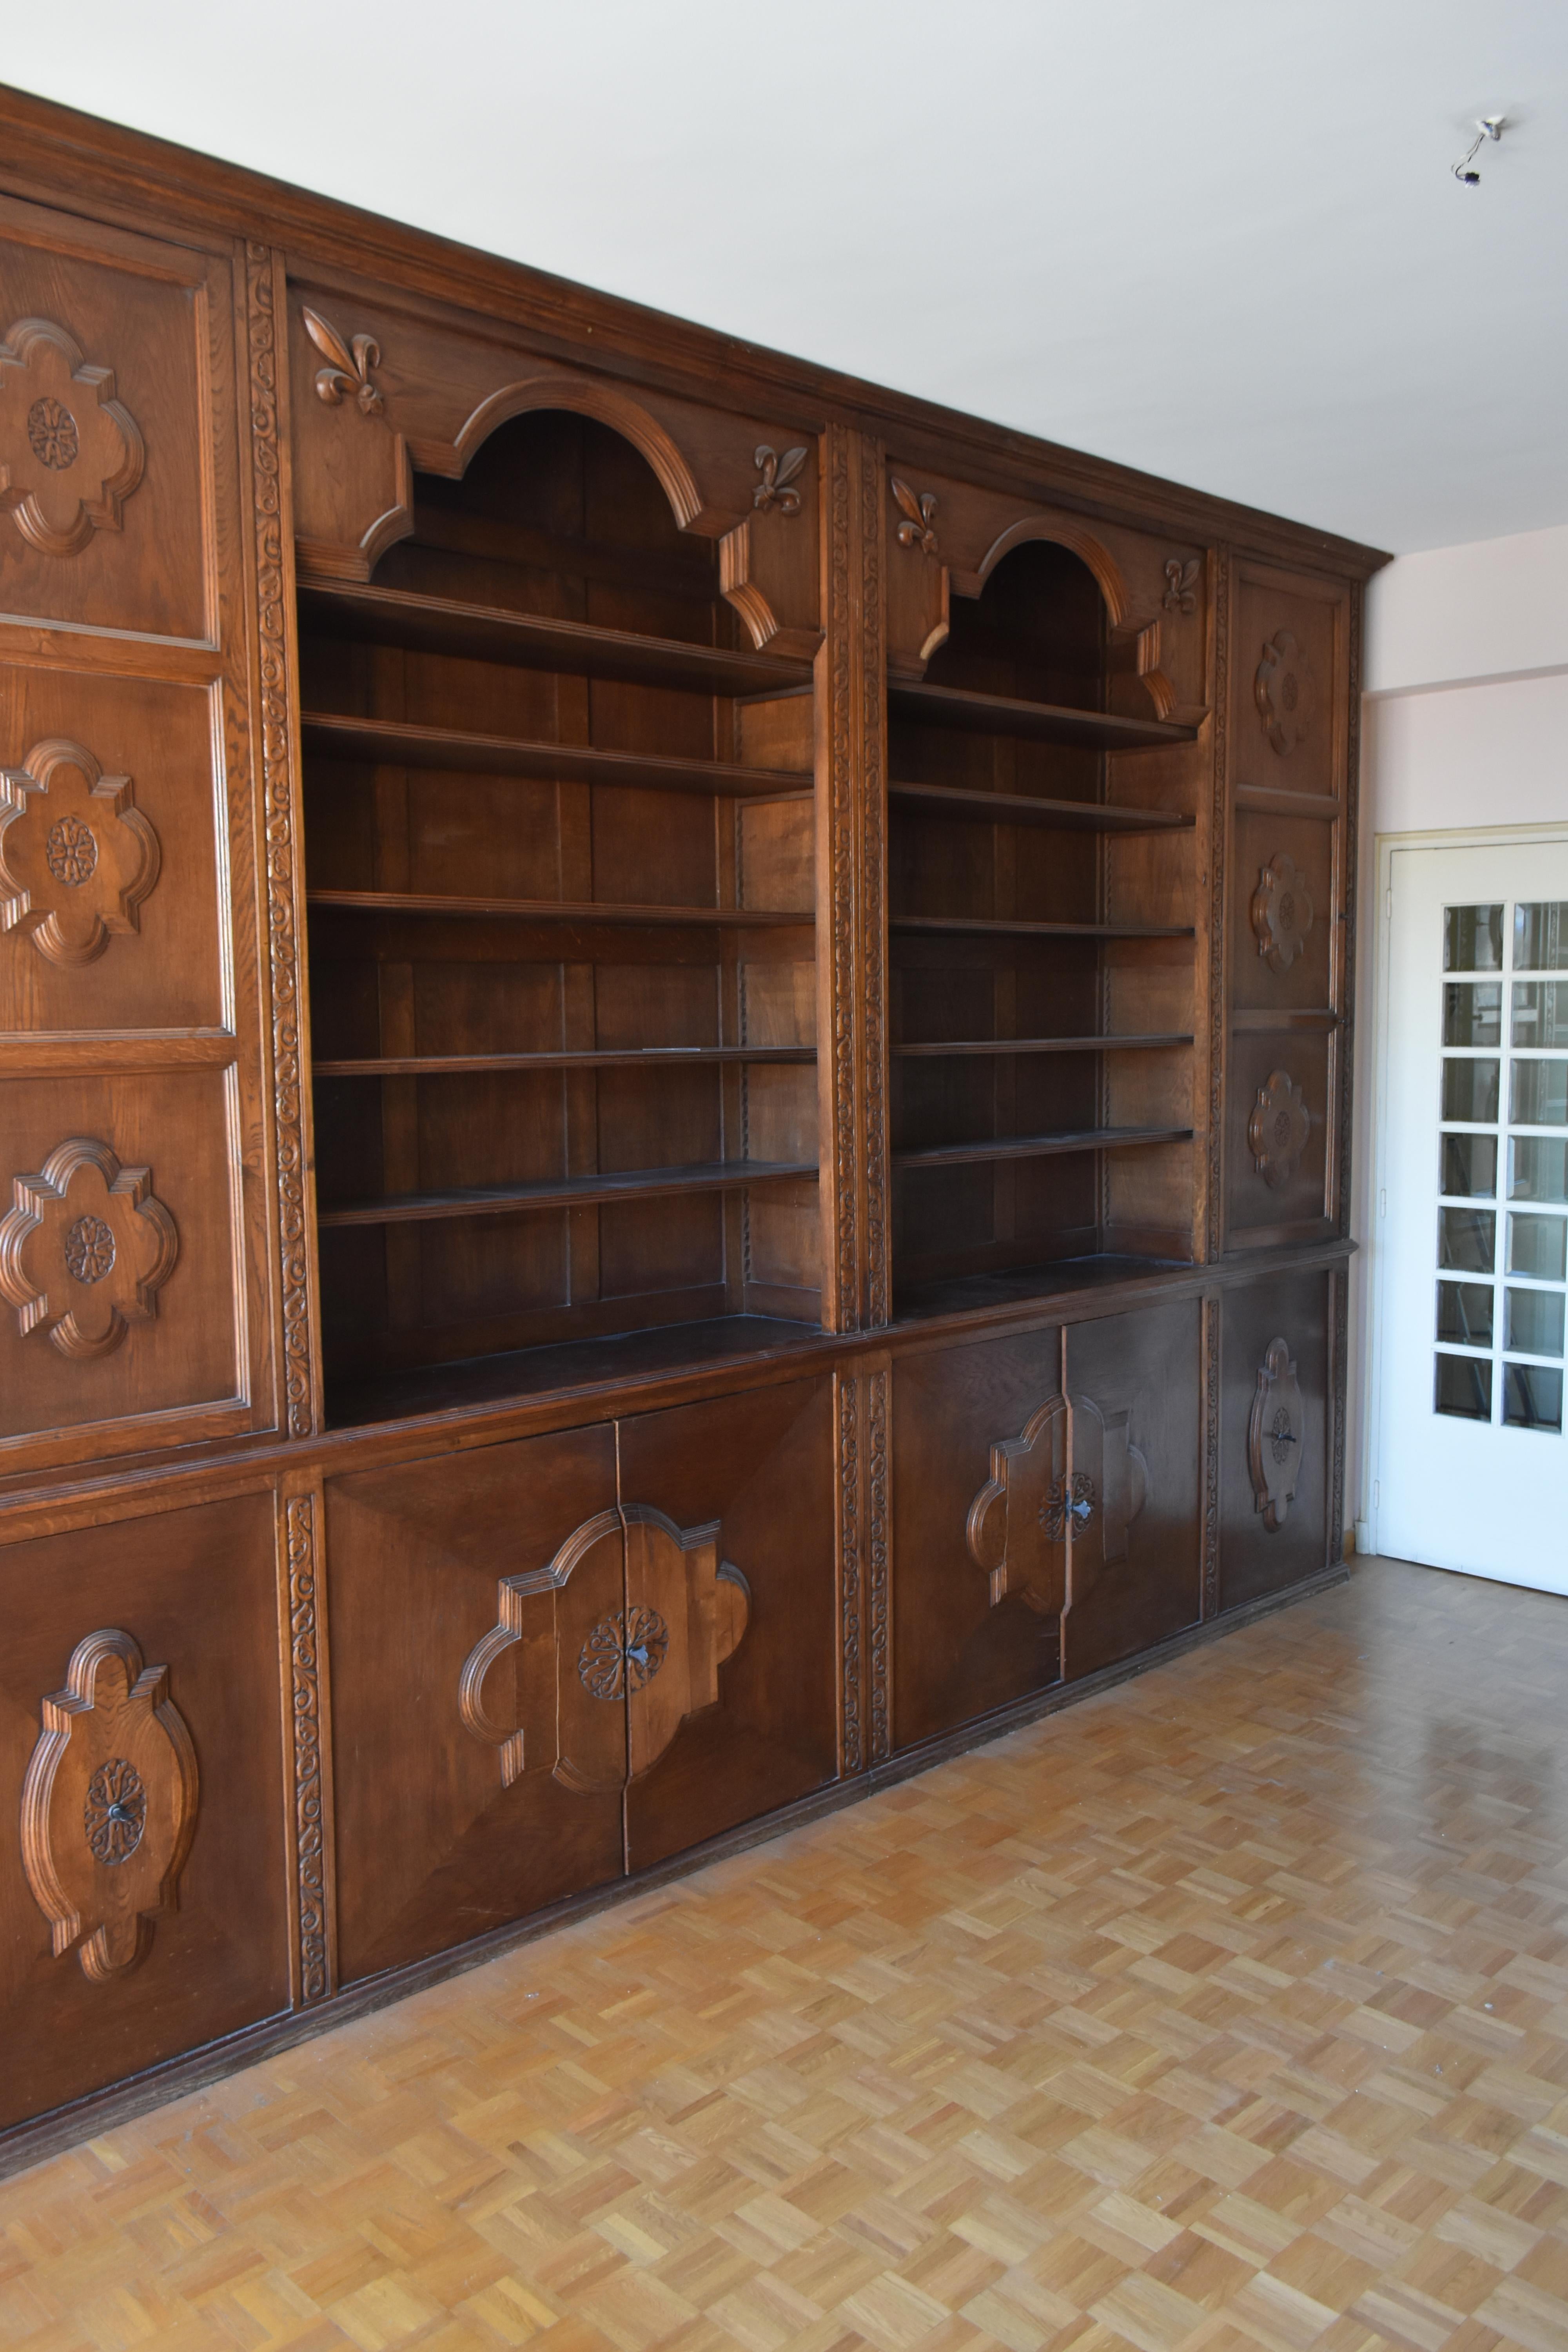 Woodwork forming oak library style 1900s composed of numerous storage and shelves. Originally it was a pharmacy woodwork. Decor with lily flowers.